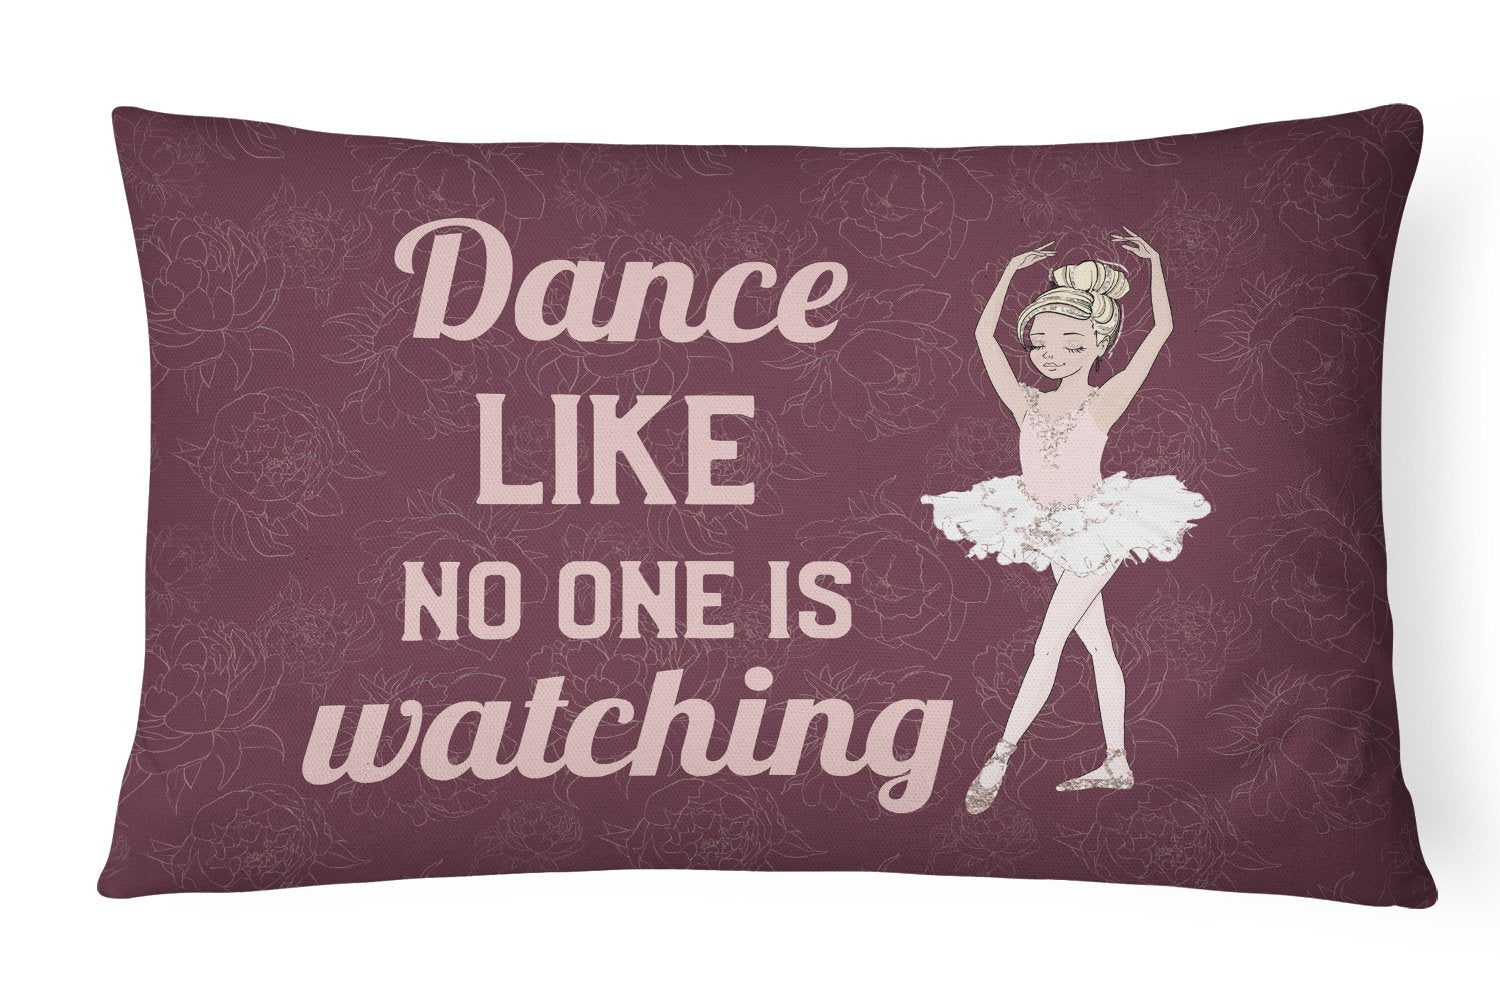 Buy this Dance like no one is watching Canvas Fabric Decorative Pillow